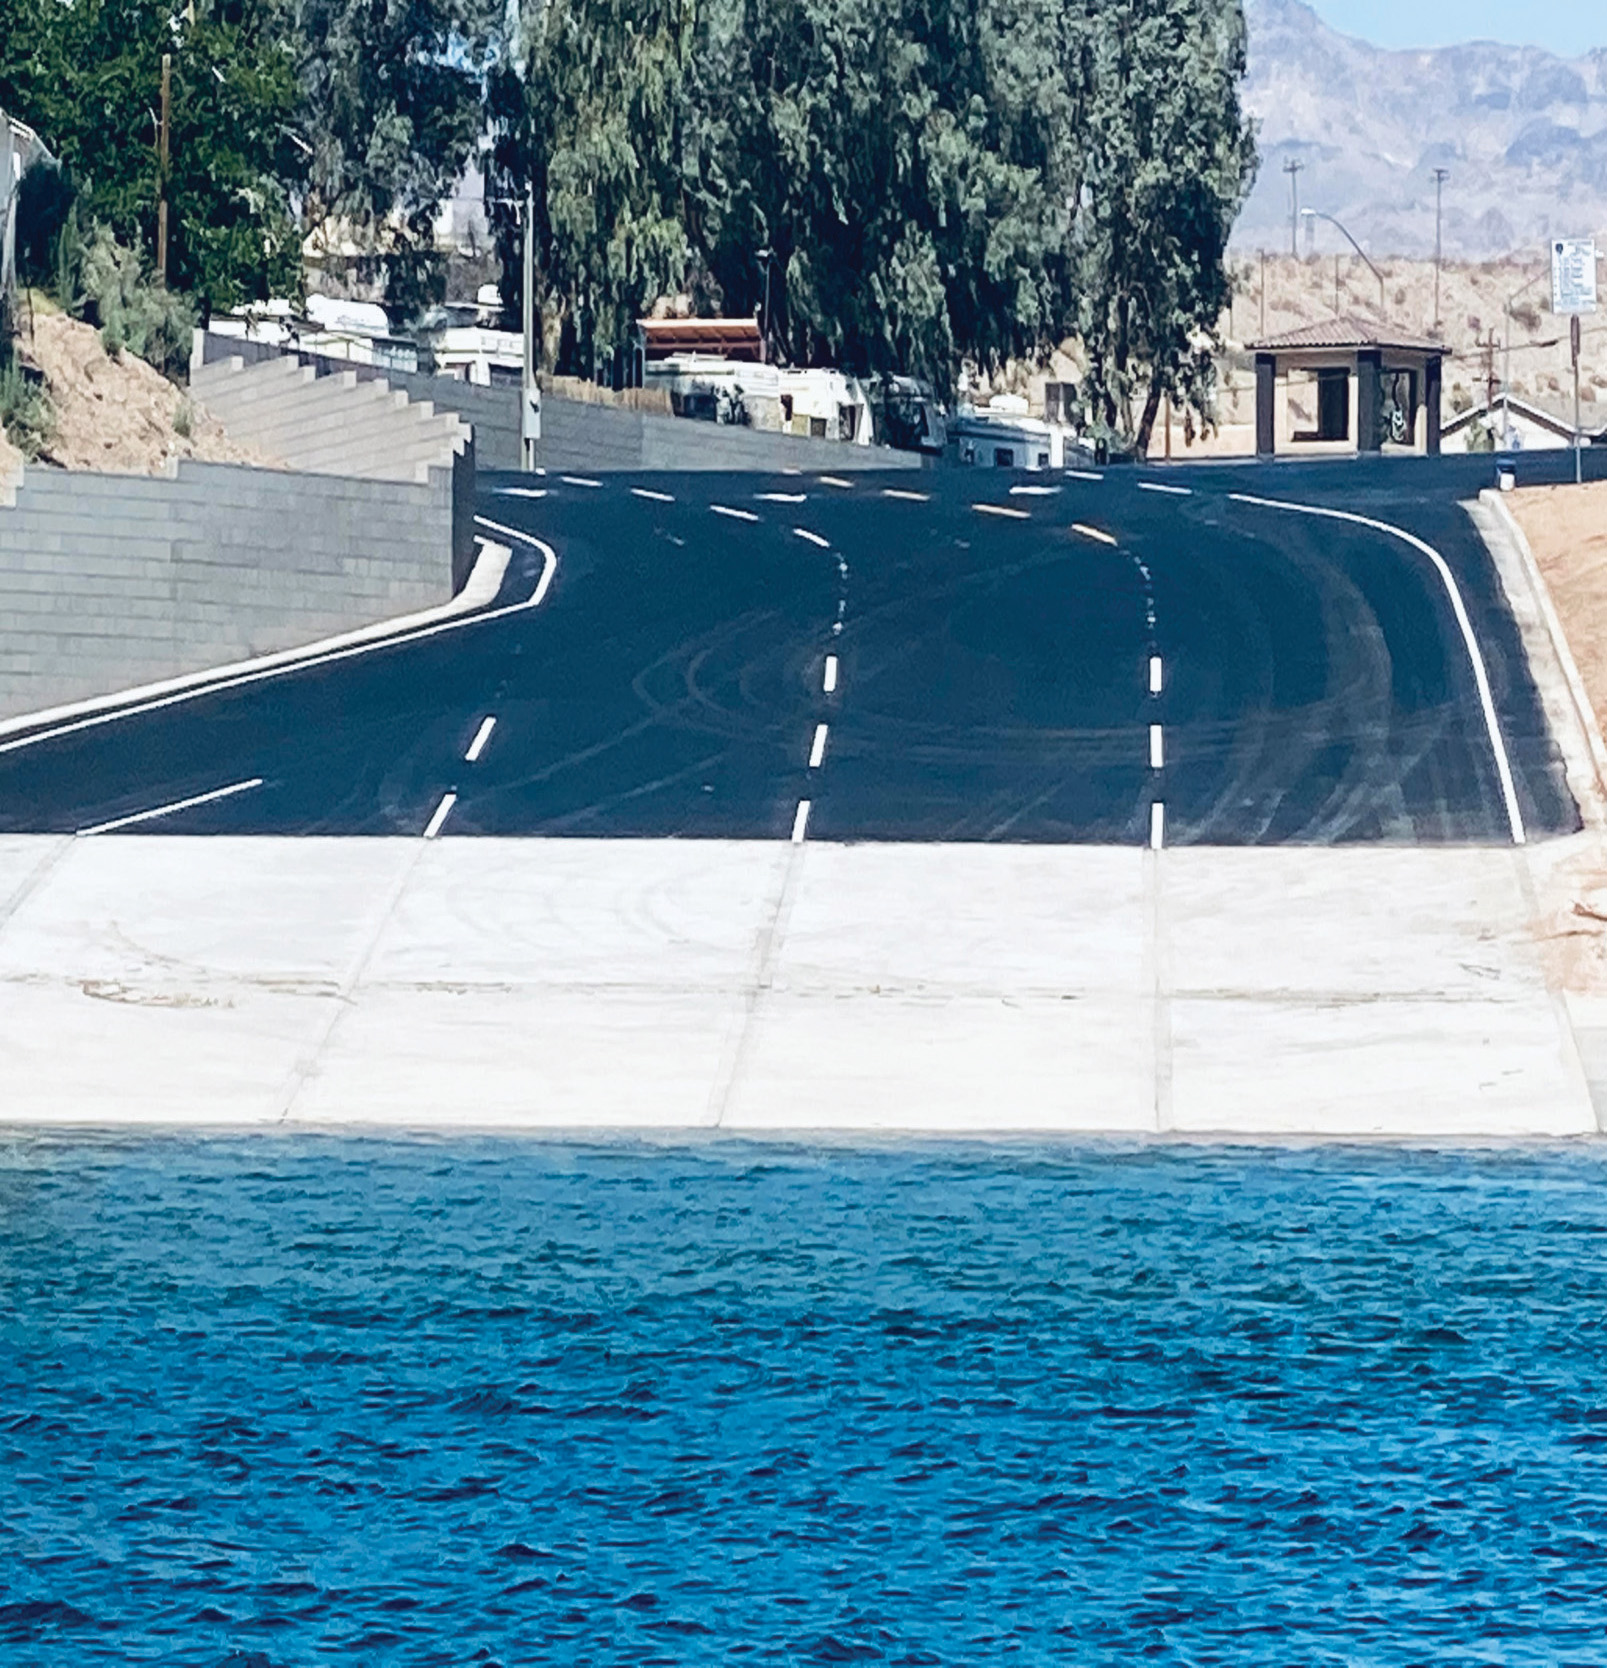 Community Park Commercial Launch Ramp is a new boat launch for use by businesses that utilize the Colorado River.